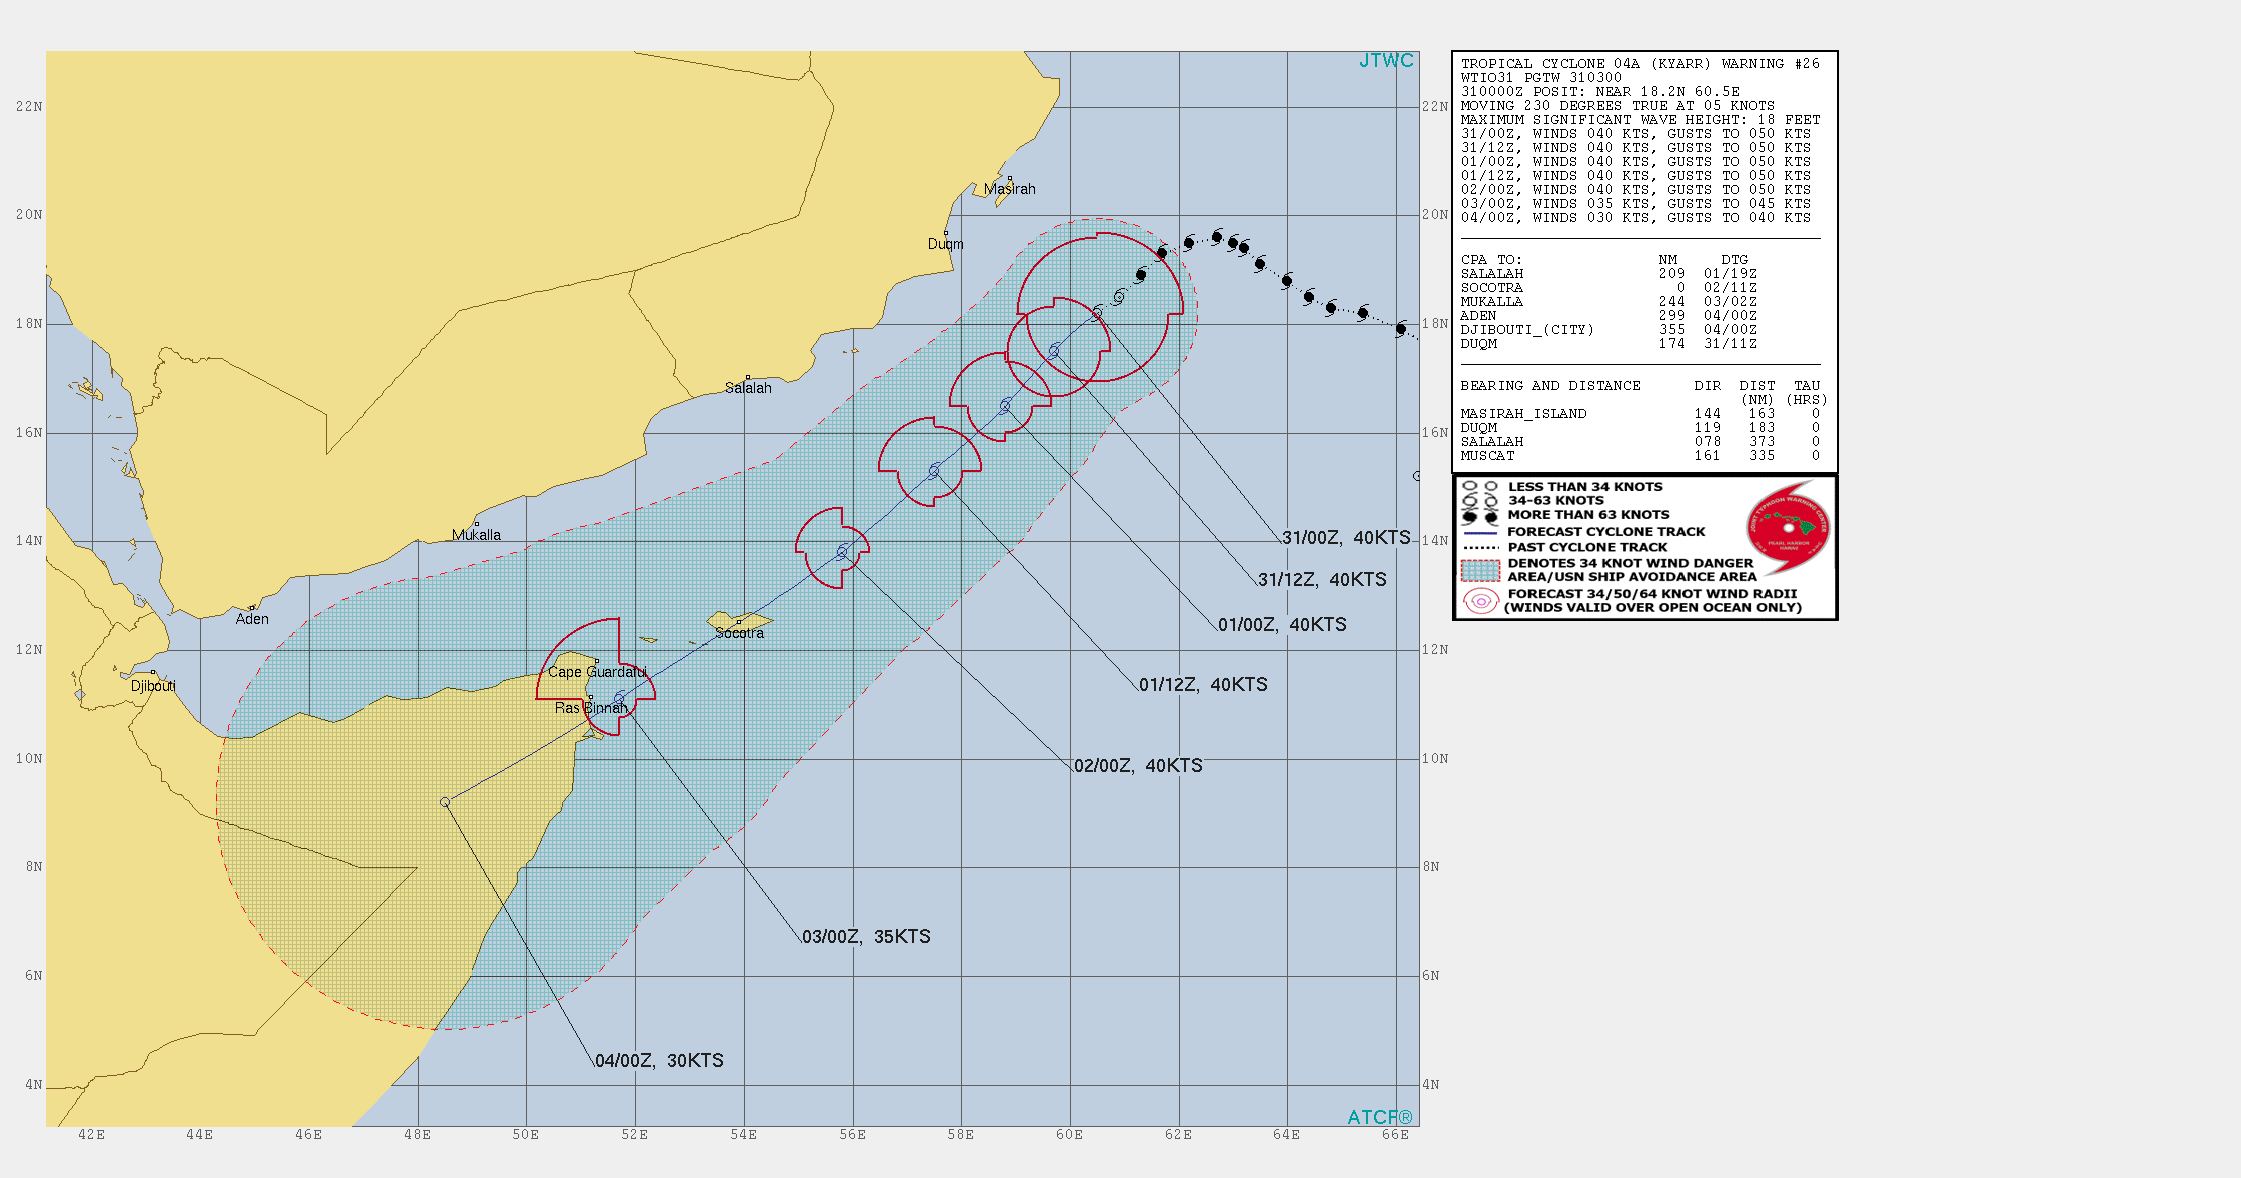 TC 04A: FORECAST TO TRACK OVER SOCOTRA ISLAND AS A 40KTS CYCLONE SHORTLY AFTER 48H